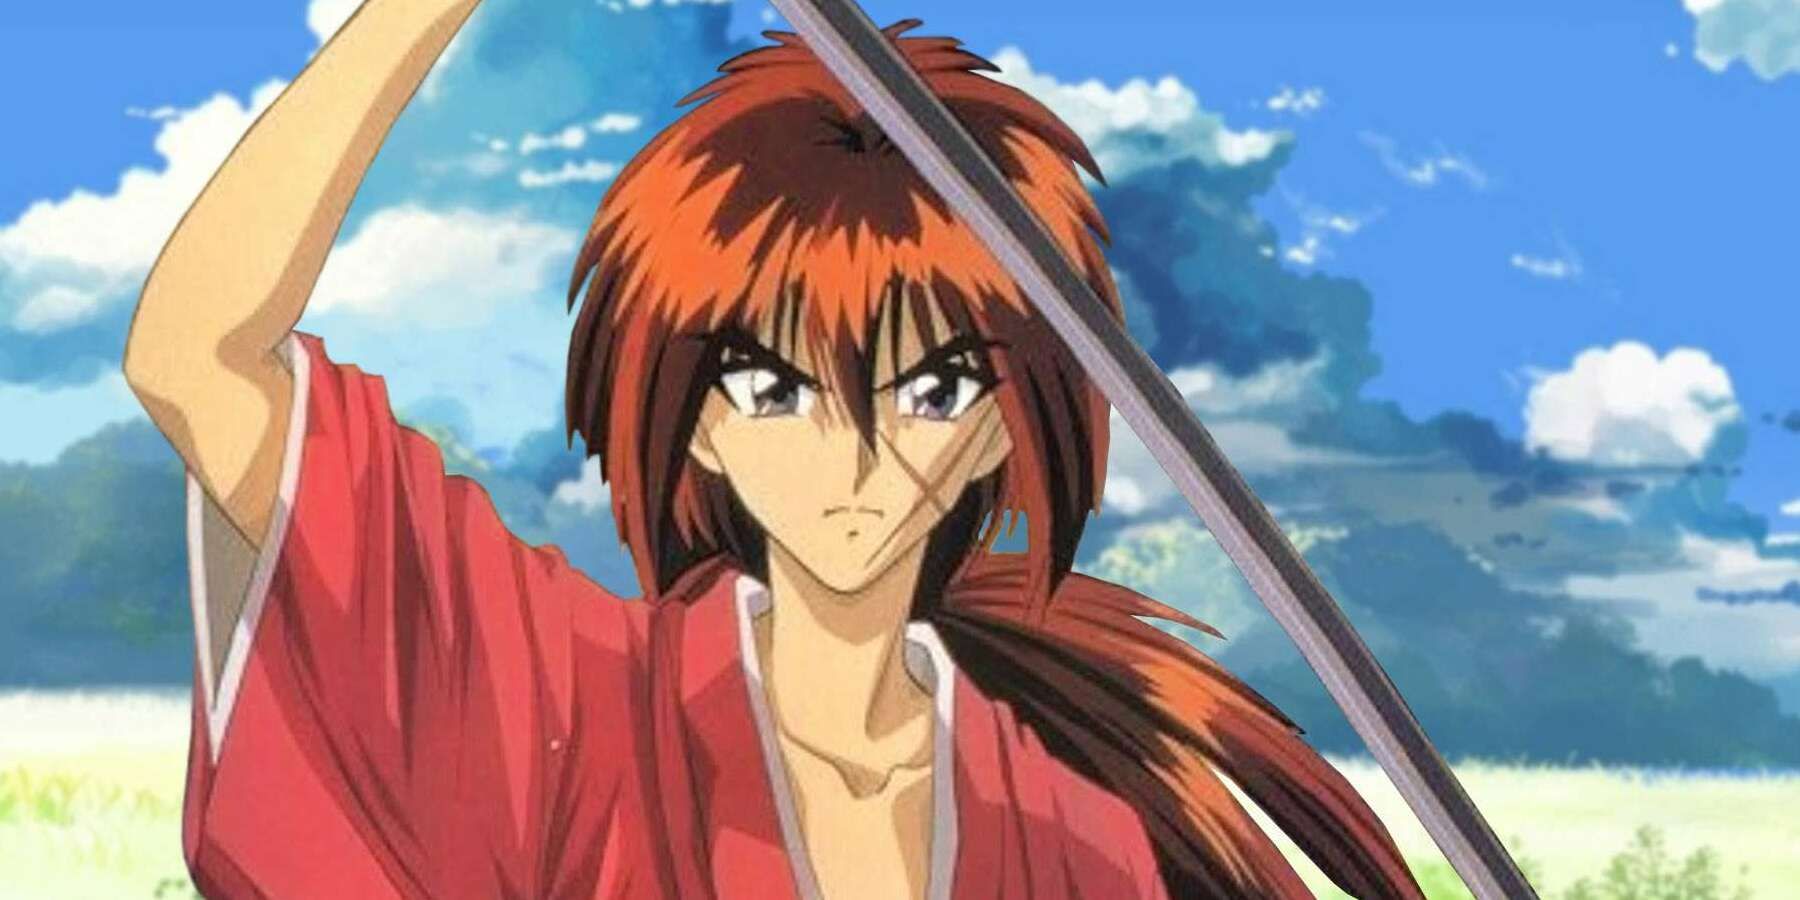 Kenshin drawing his sword against a darkly clouded sky